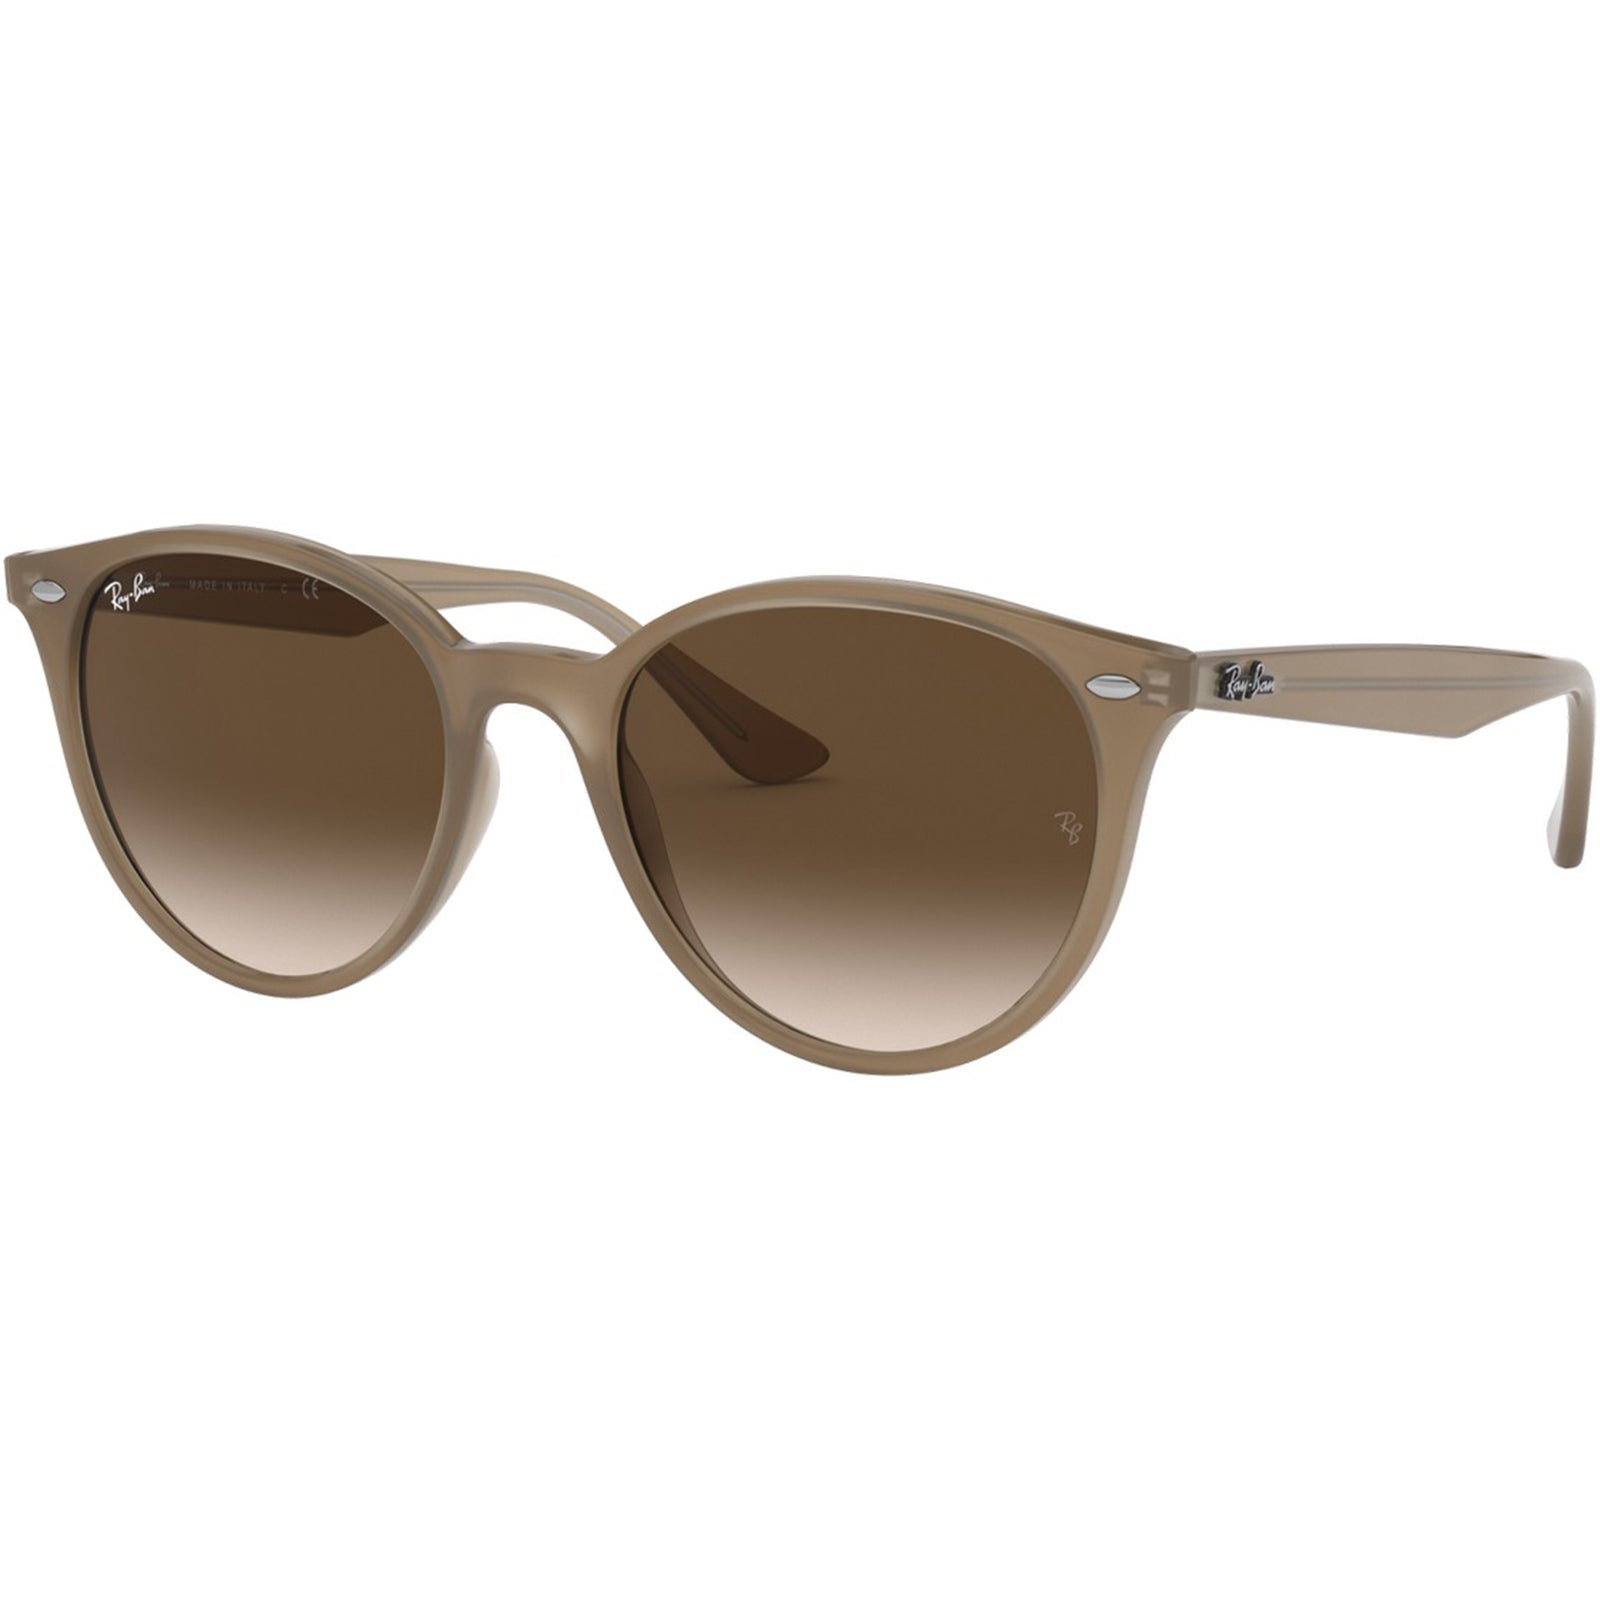 Ray-Ban RB4305 Adult Lifestyle Sunglasses-0RB4305